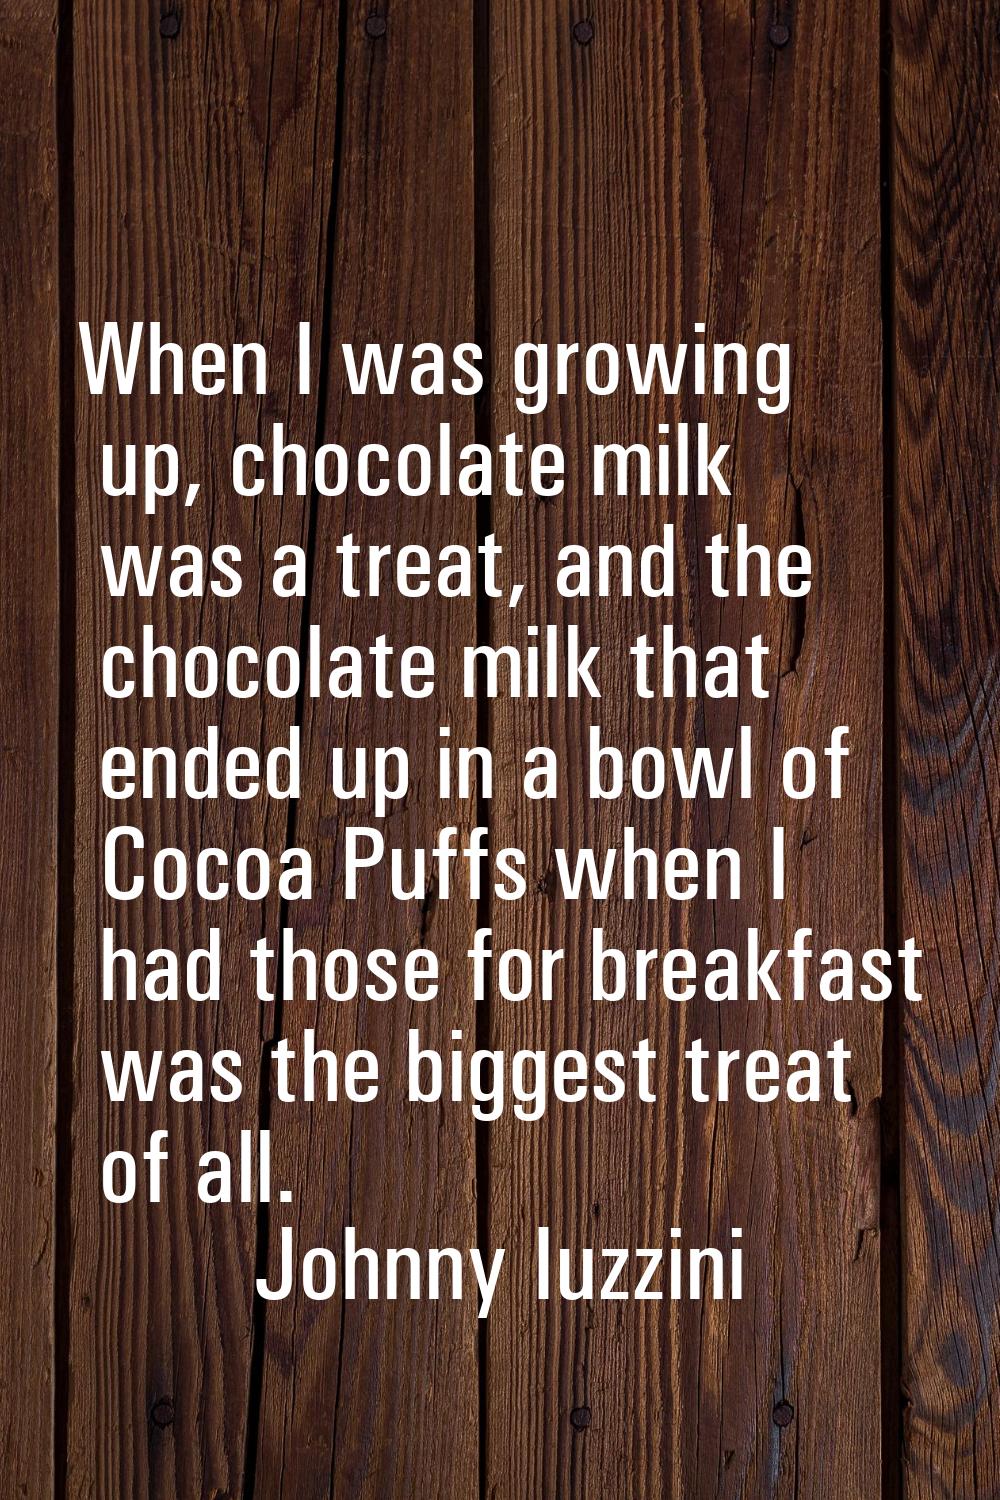 When I was growing up, chocolate milk was a treat, and the chocolate milk that ended up in a bowl o